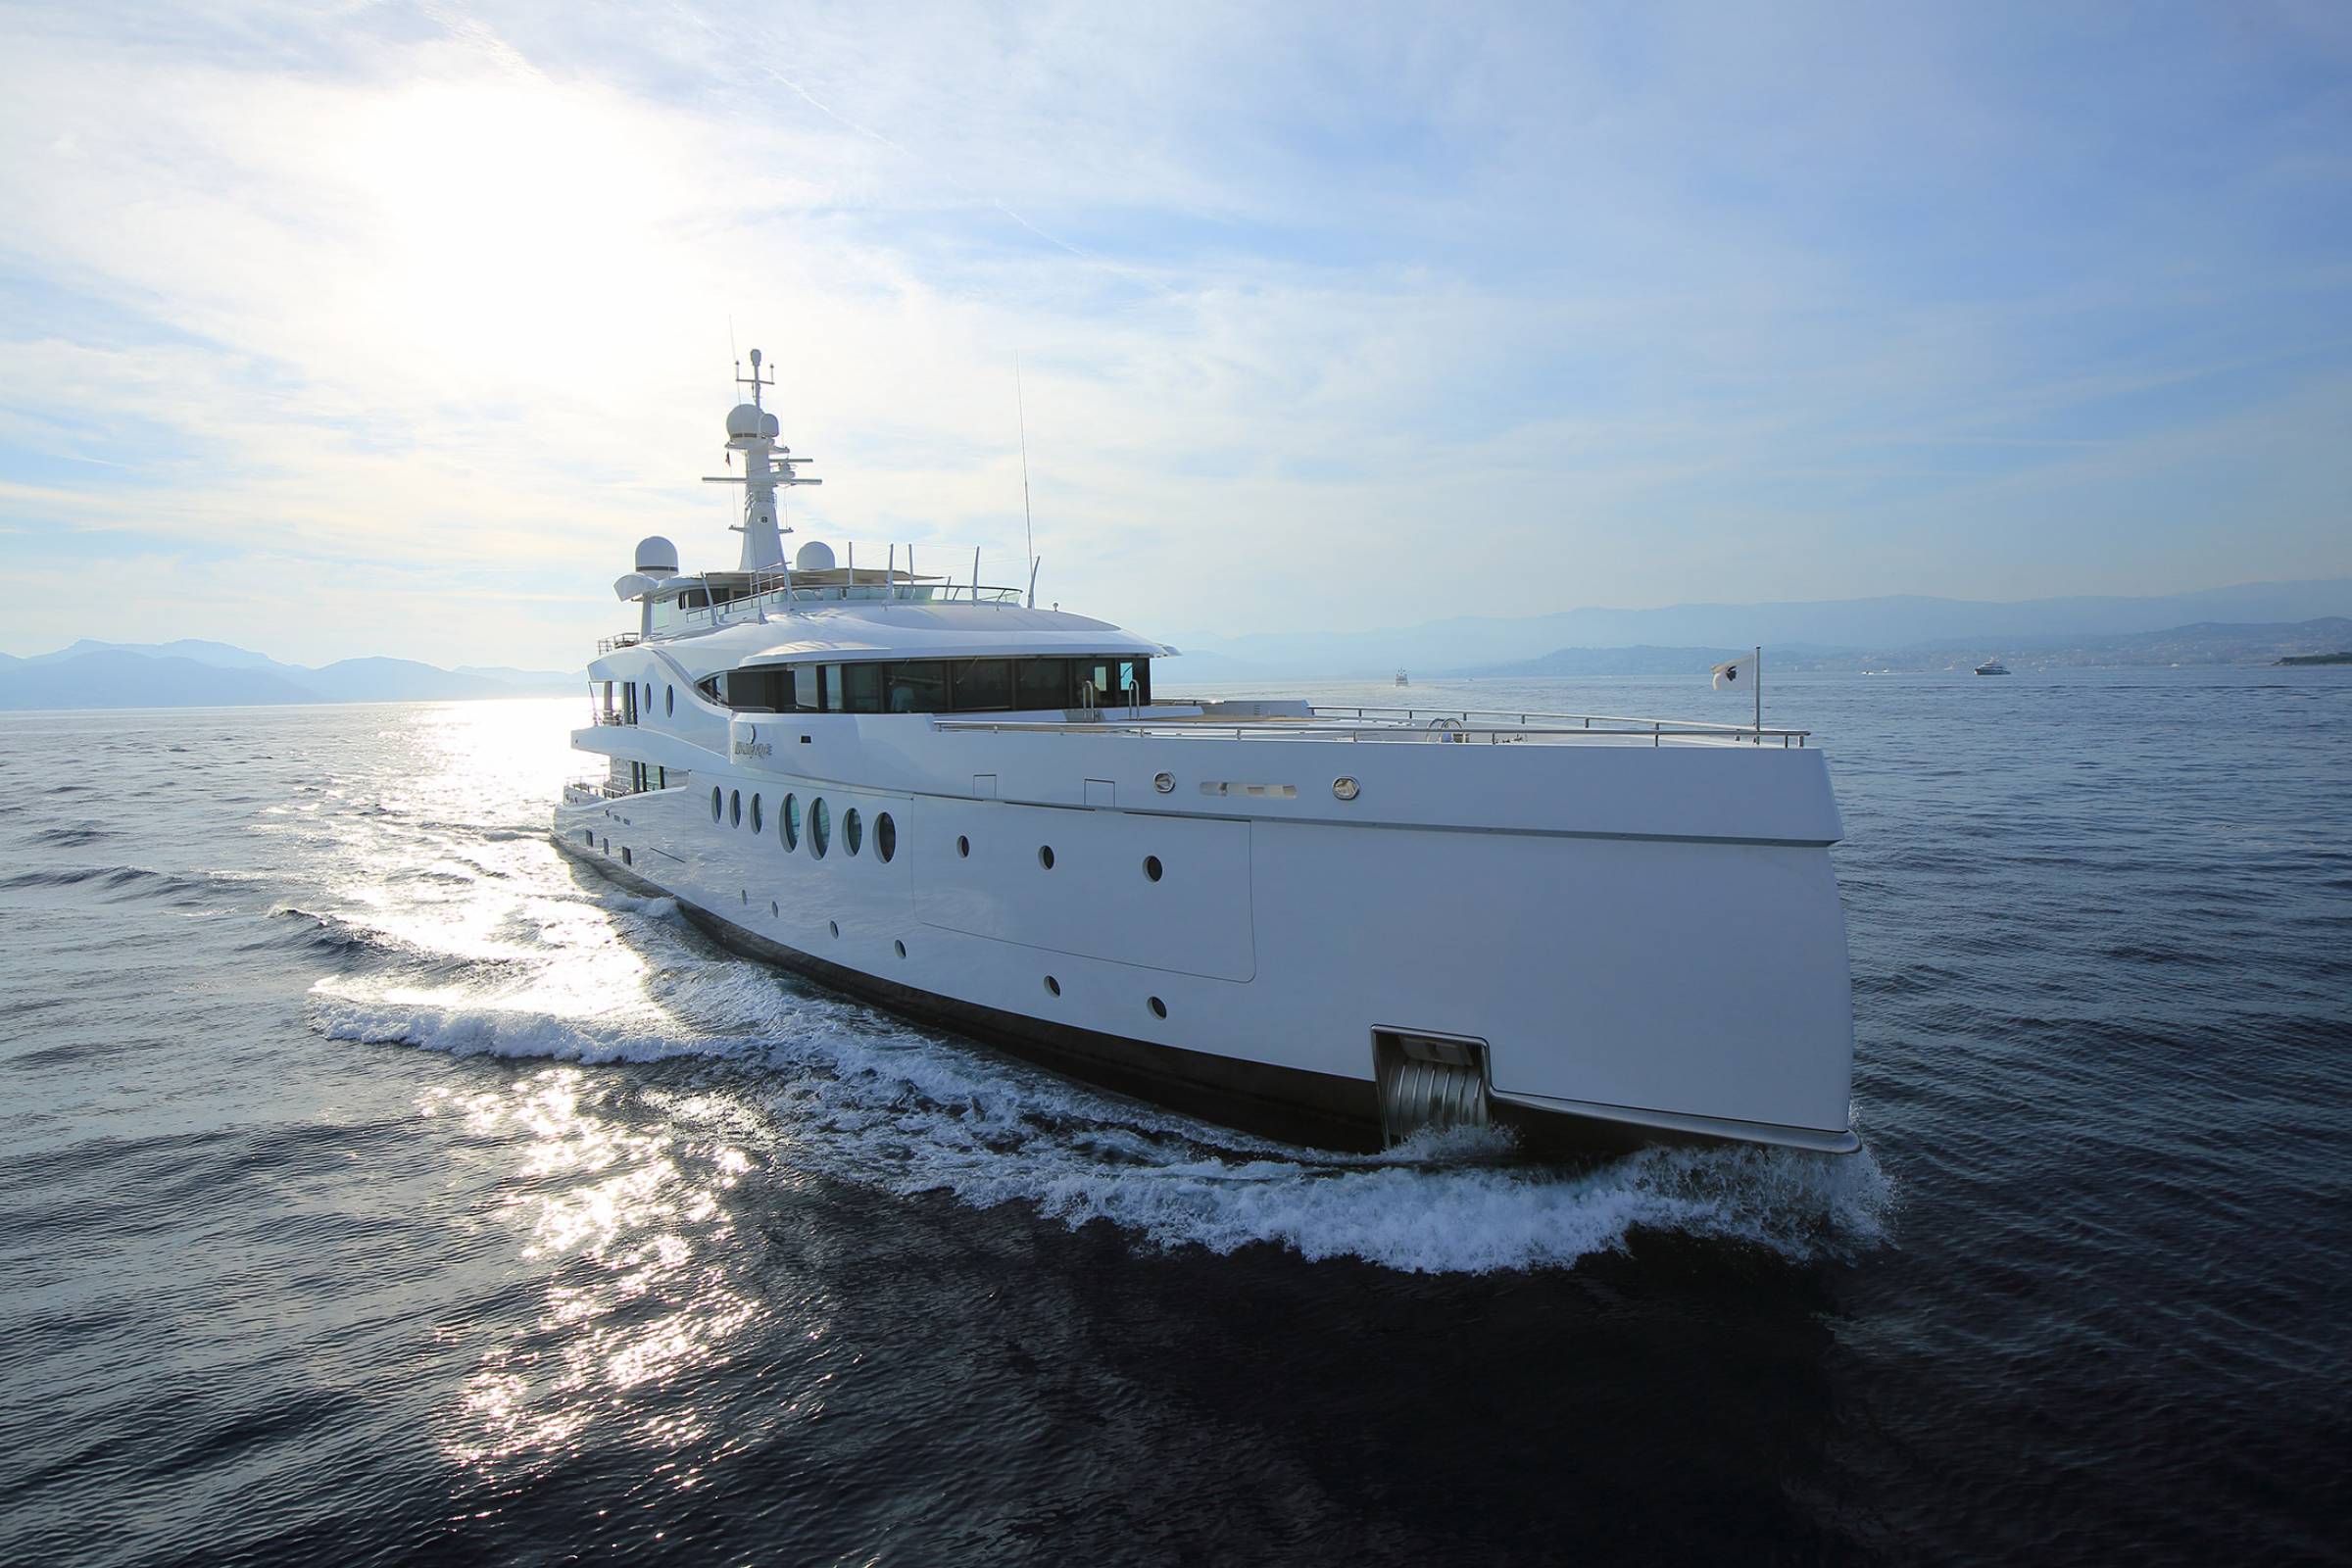 AMELS 199 Limited Edition Yacht - Bow Underway